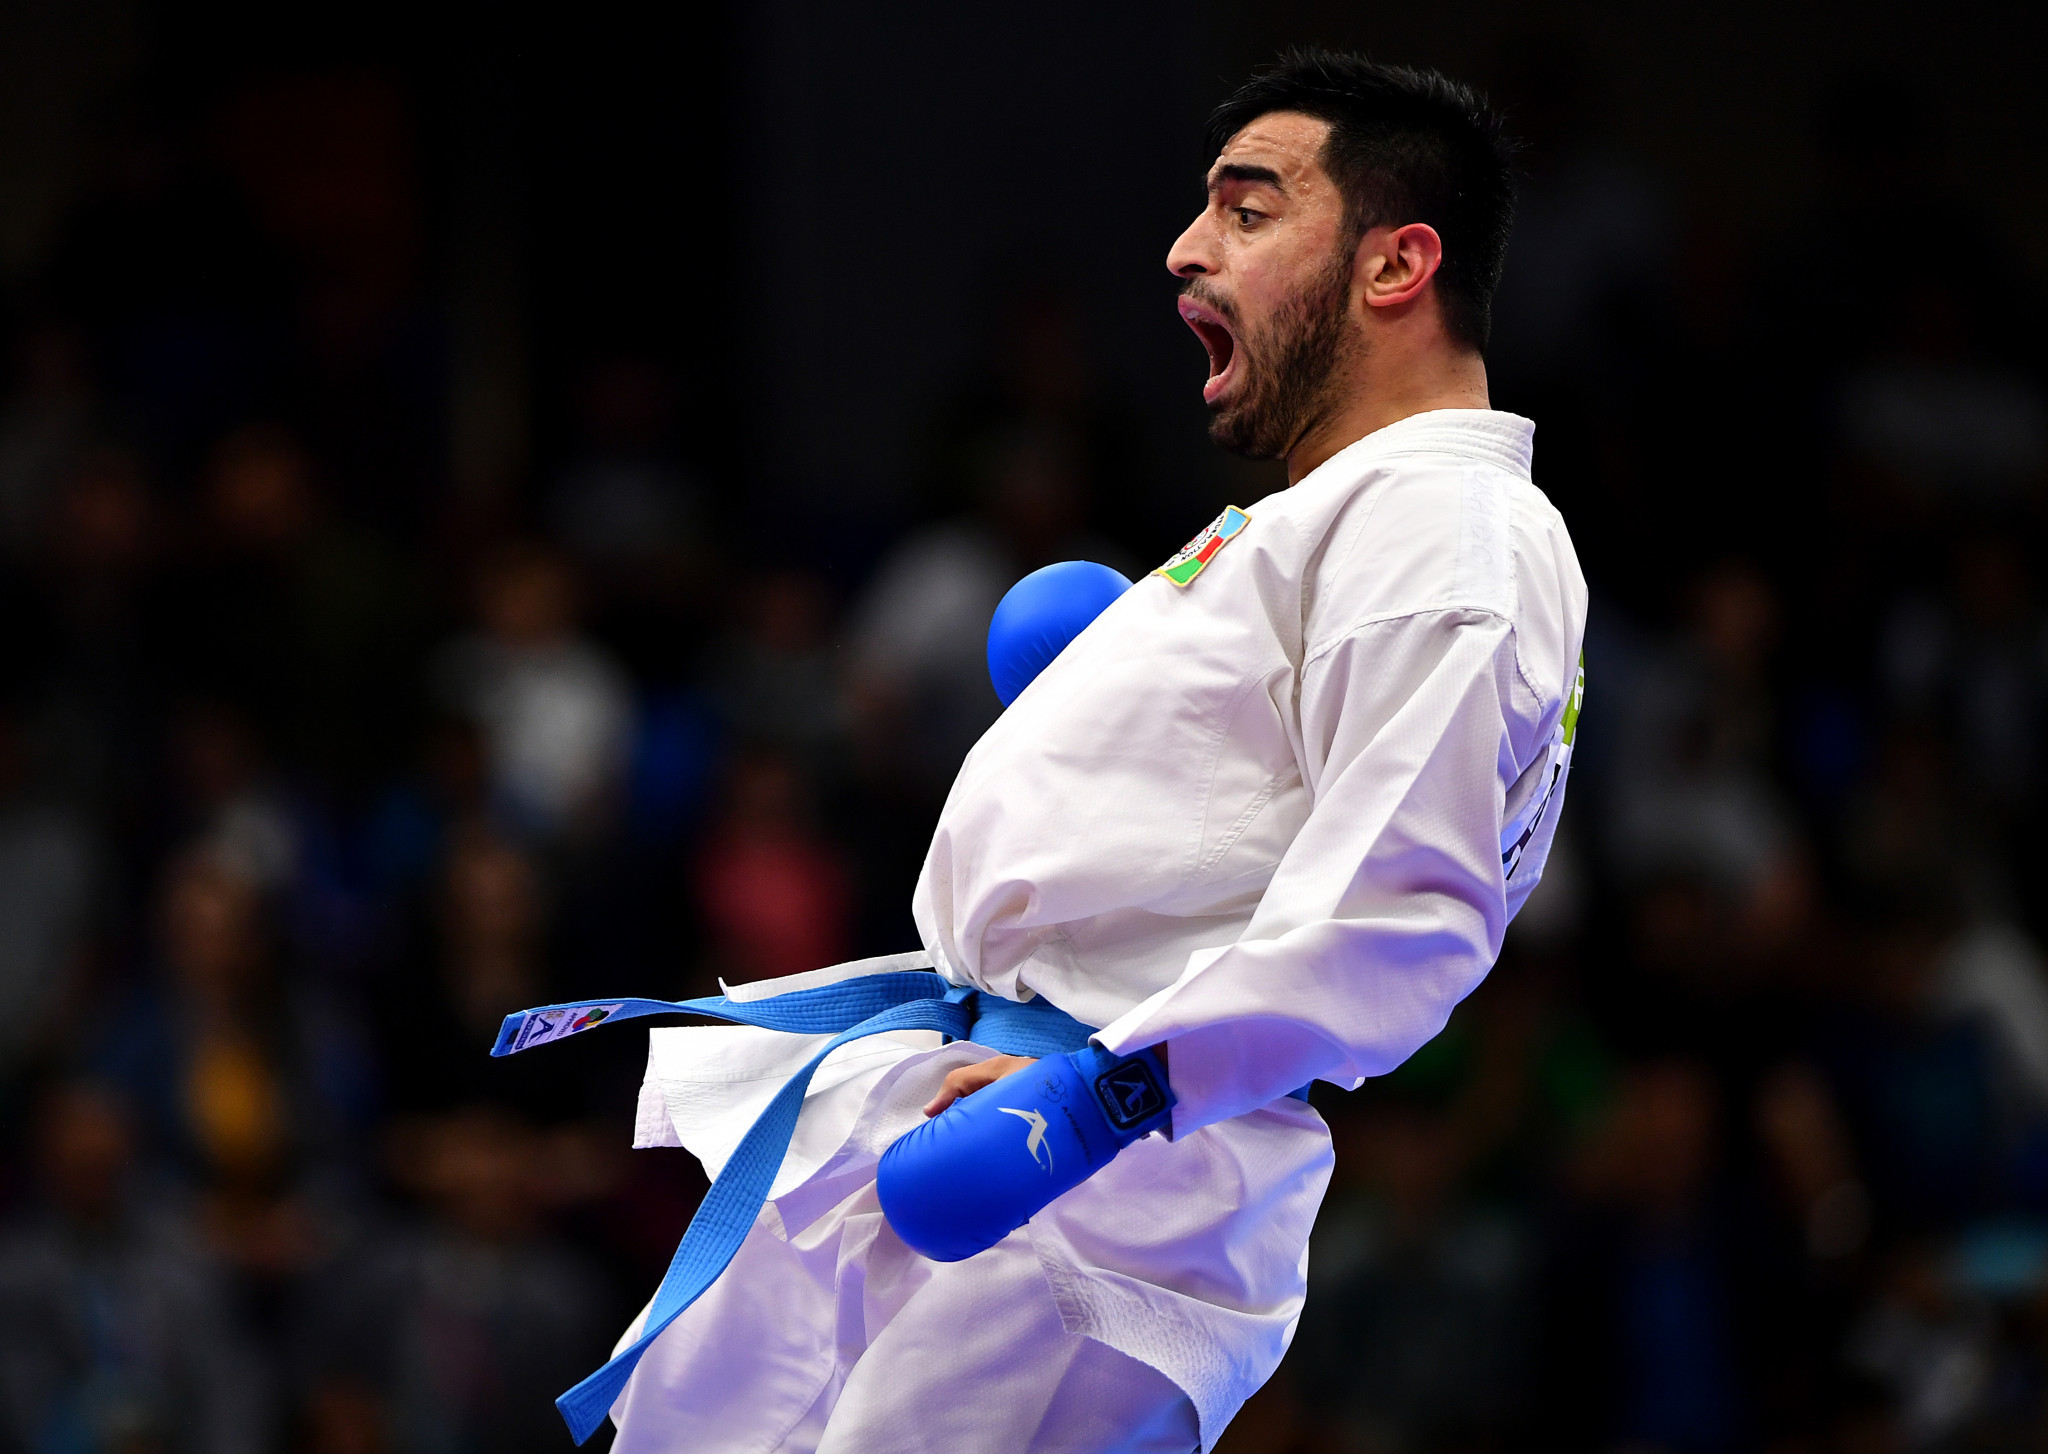 All focus will be on home favourite and world bronze medallist Asiman Gurbanli in Baku ©Getty Images